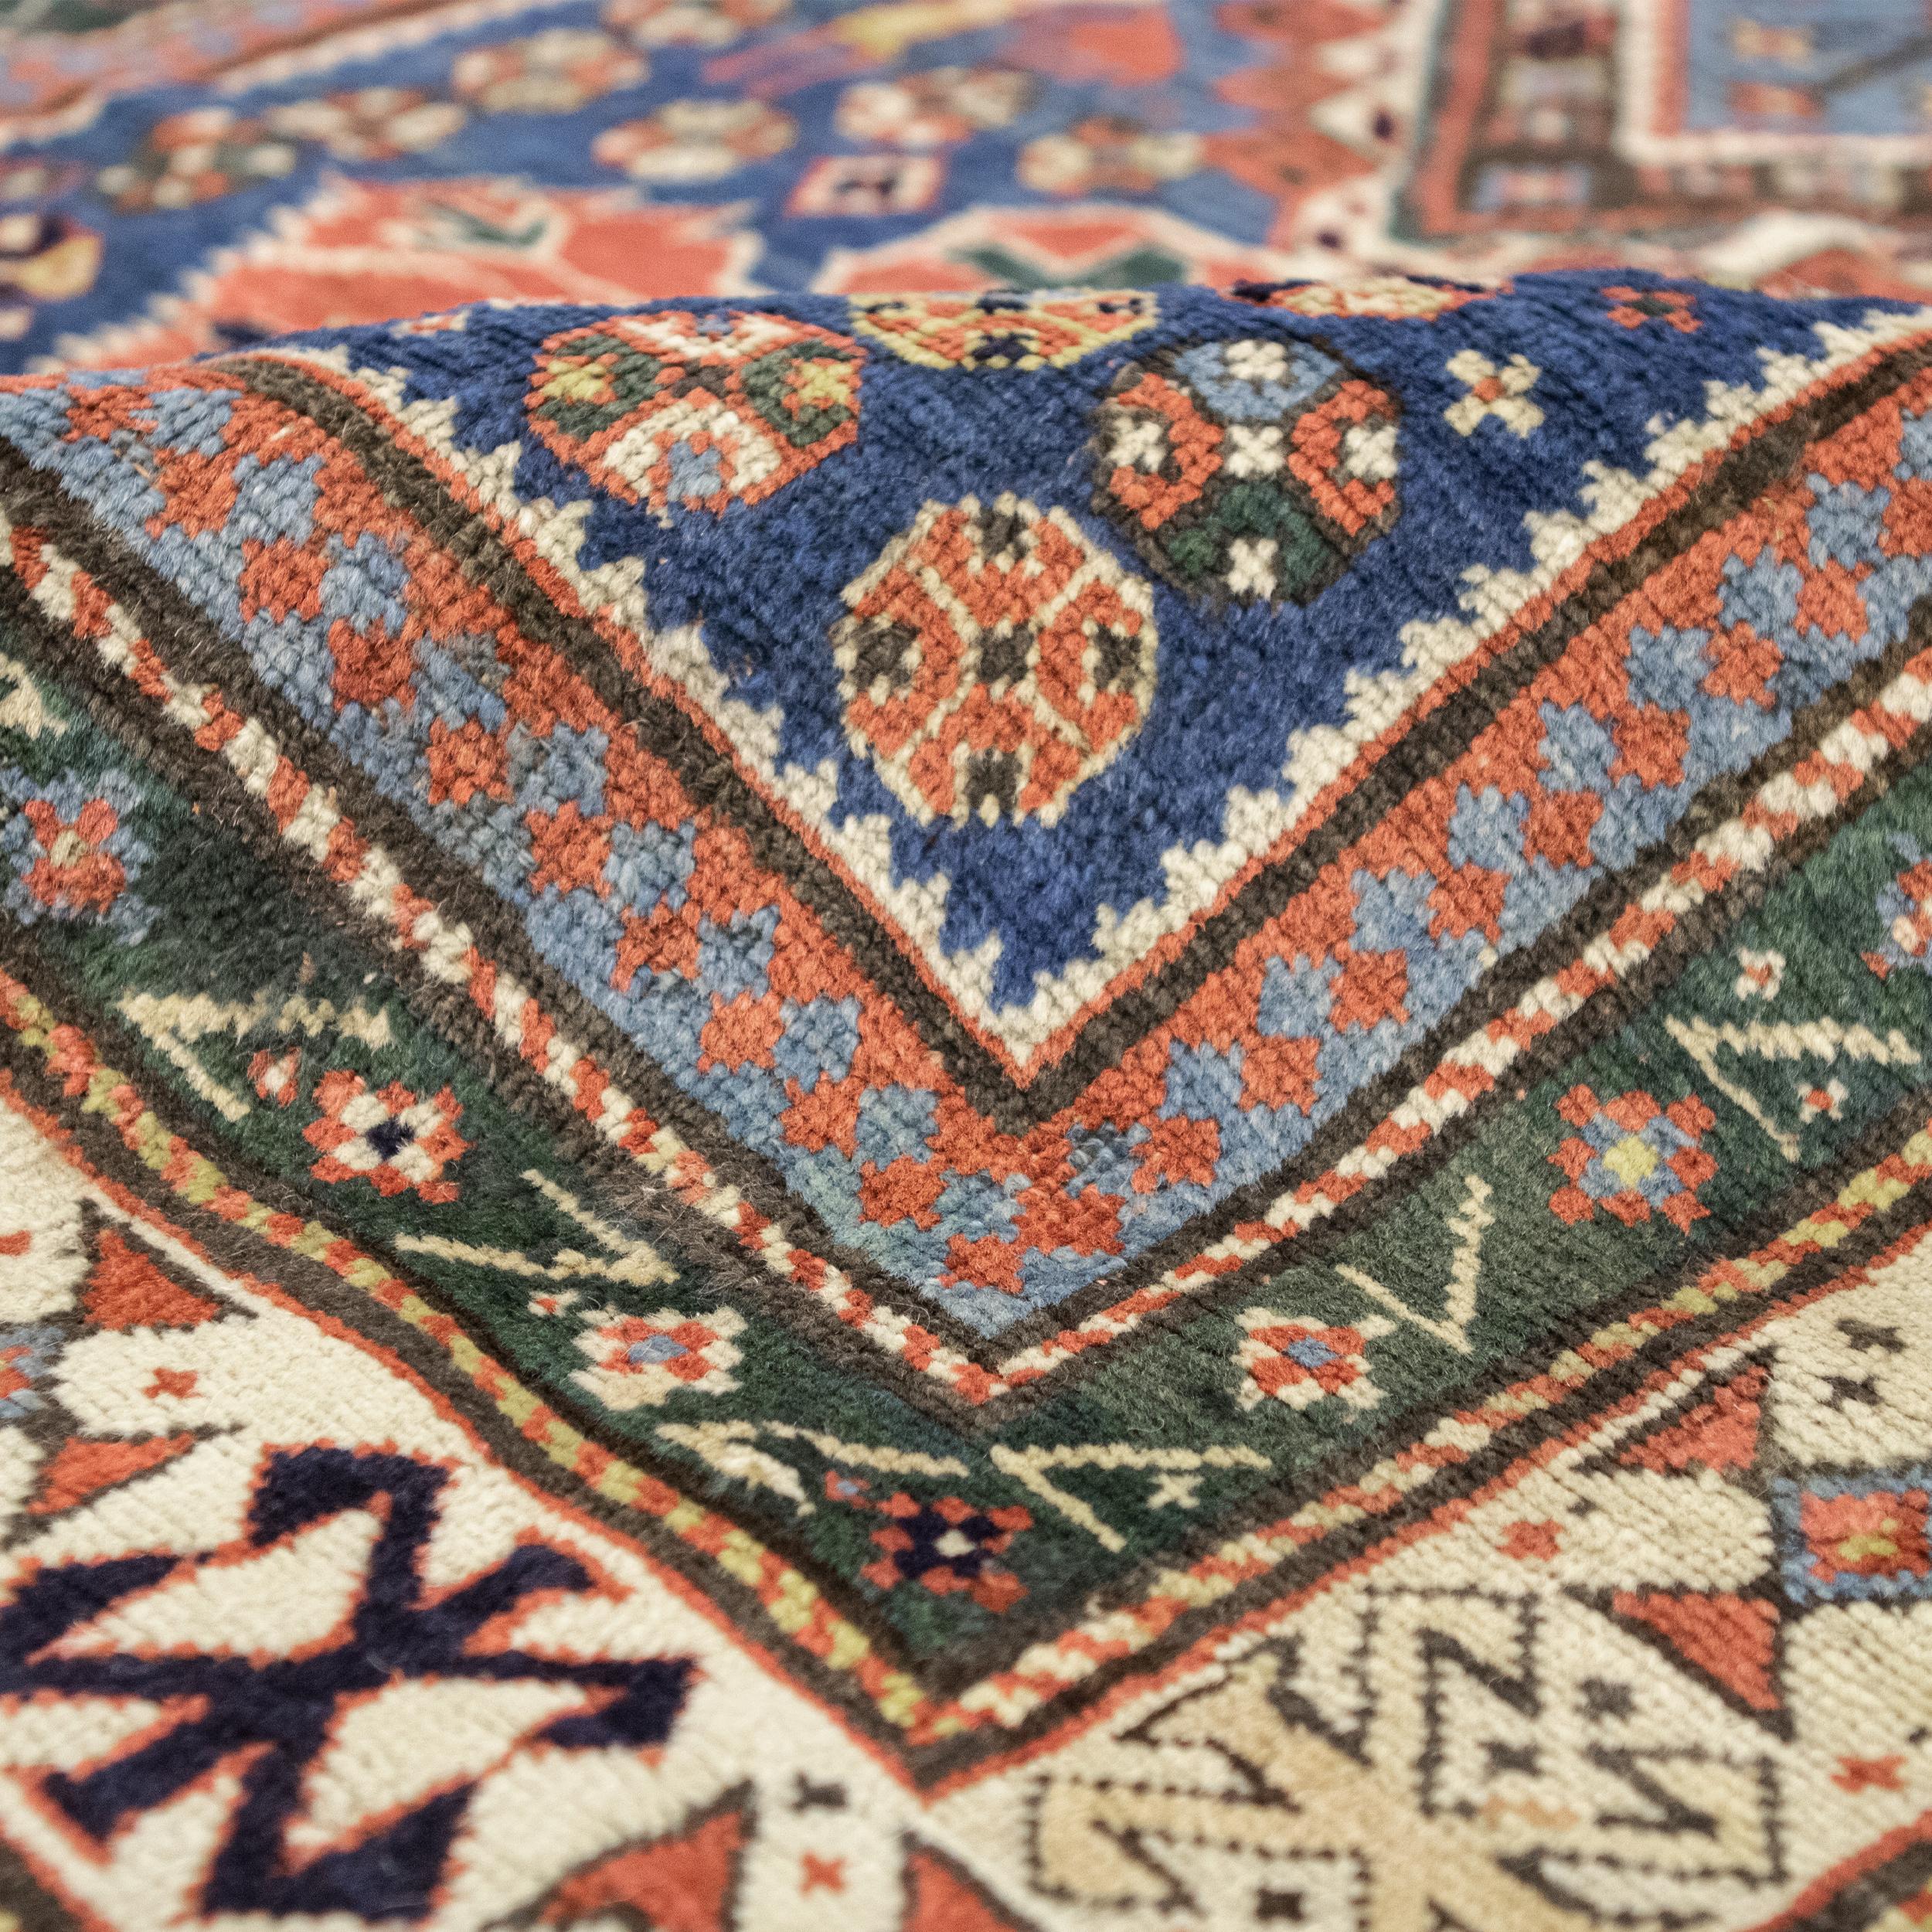 An antique Persian fine Kazak runner is a slender and captivating textile originating from the Kazak region in the Caucasus. Handwoven with premium wool and natural dyes, its bold geometric designs and tribal motifs, like 